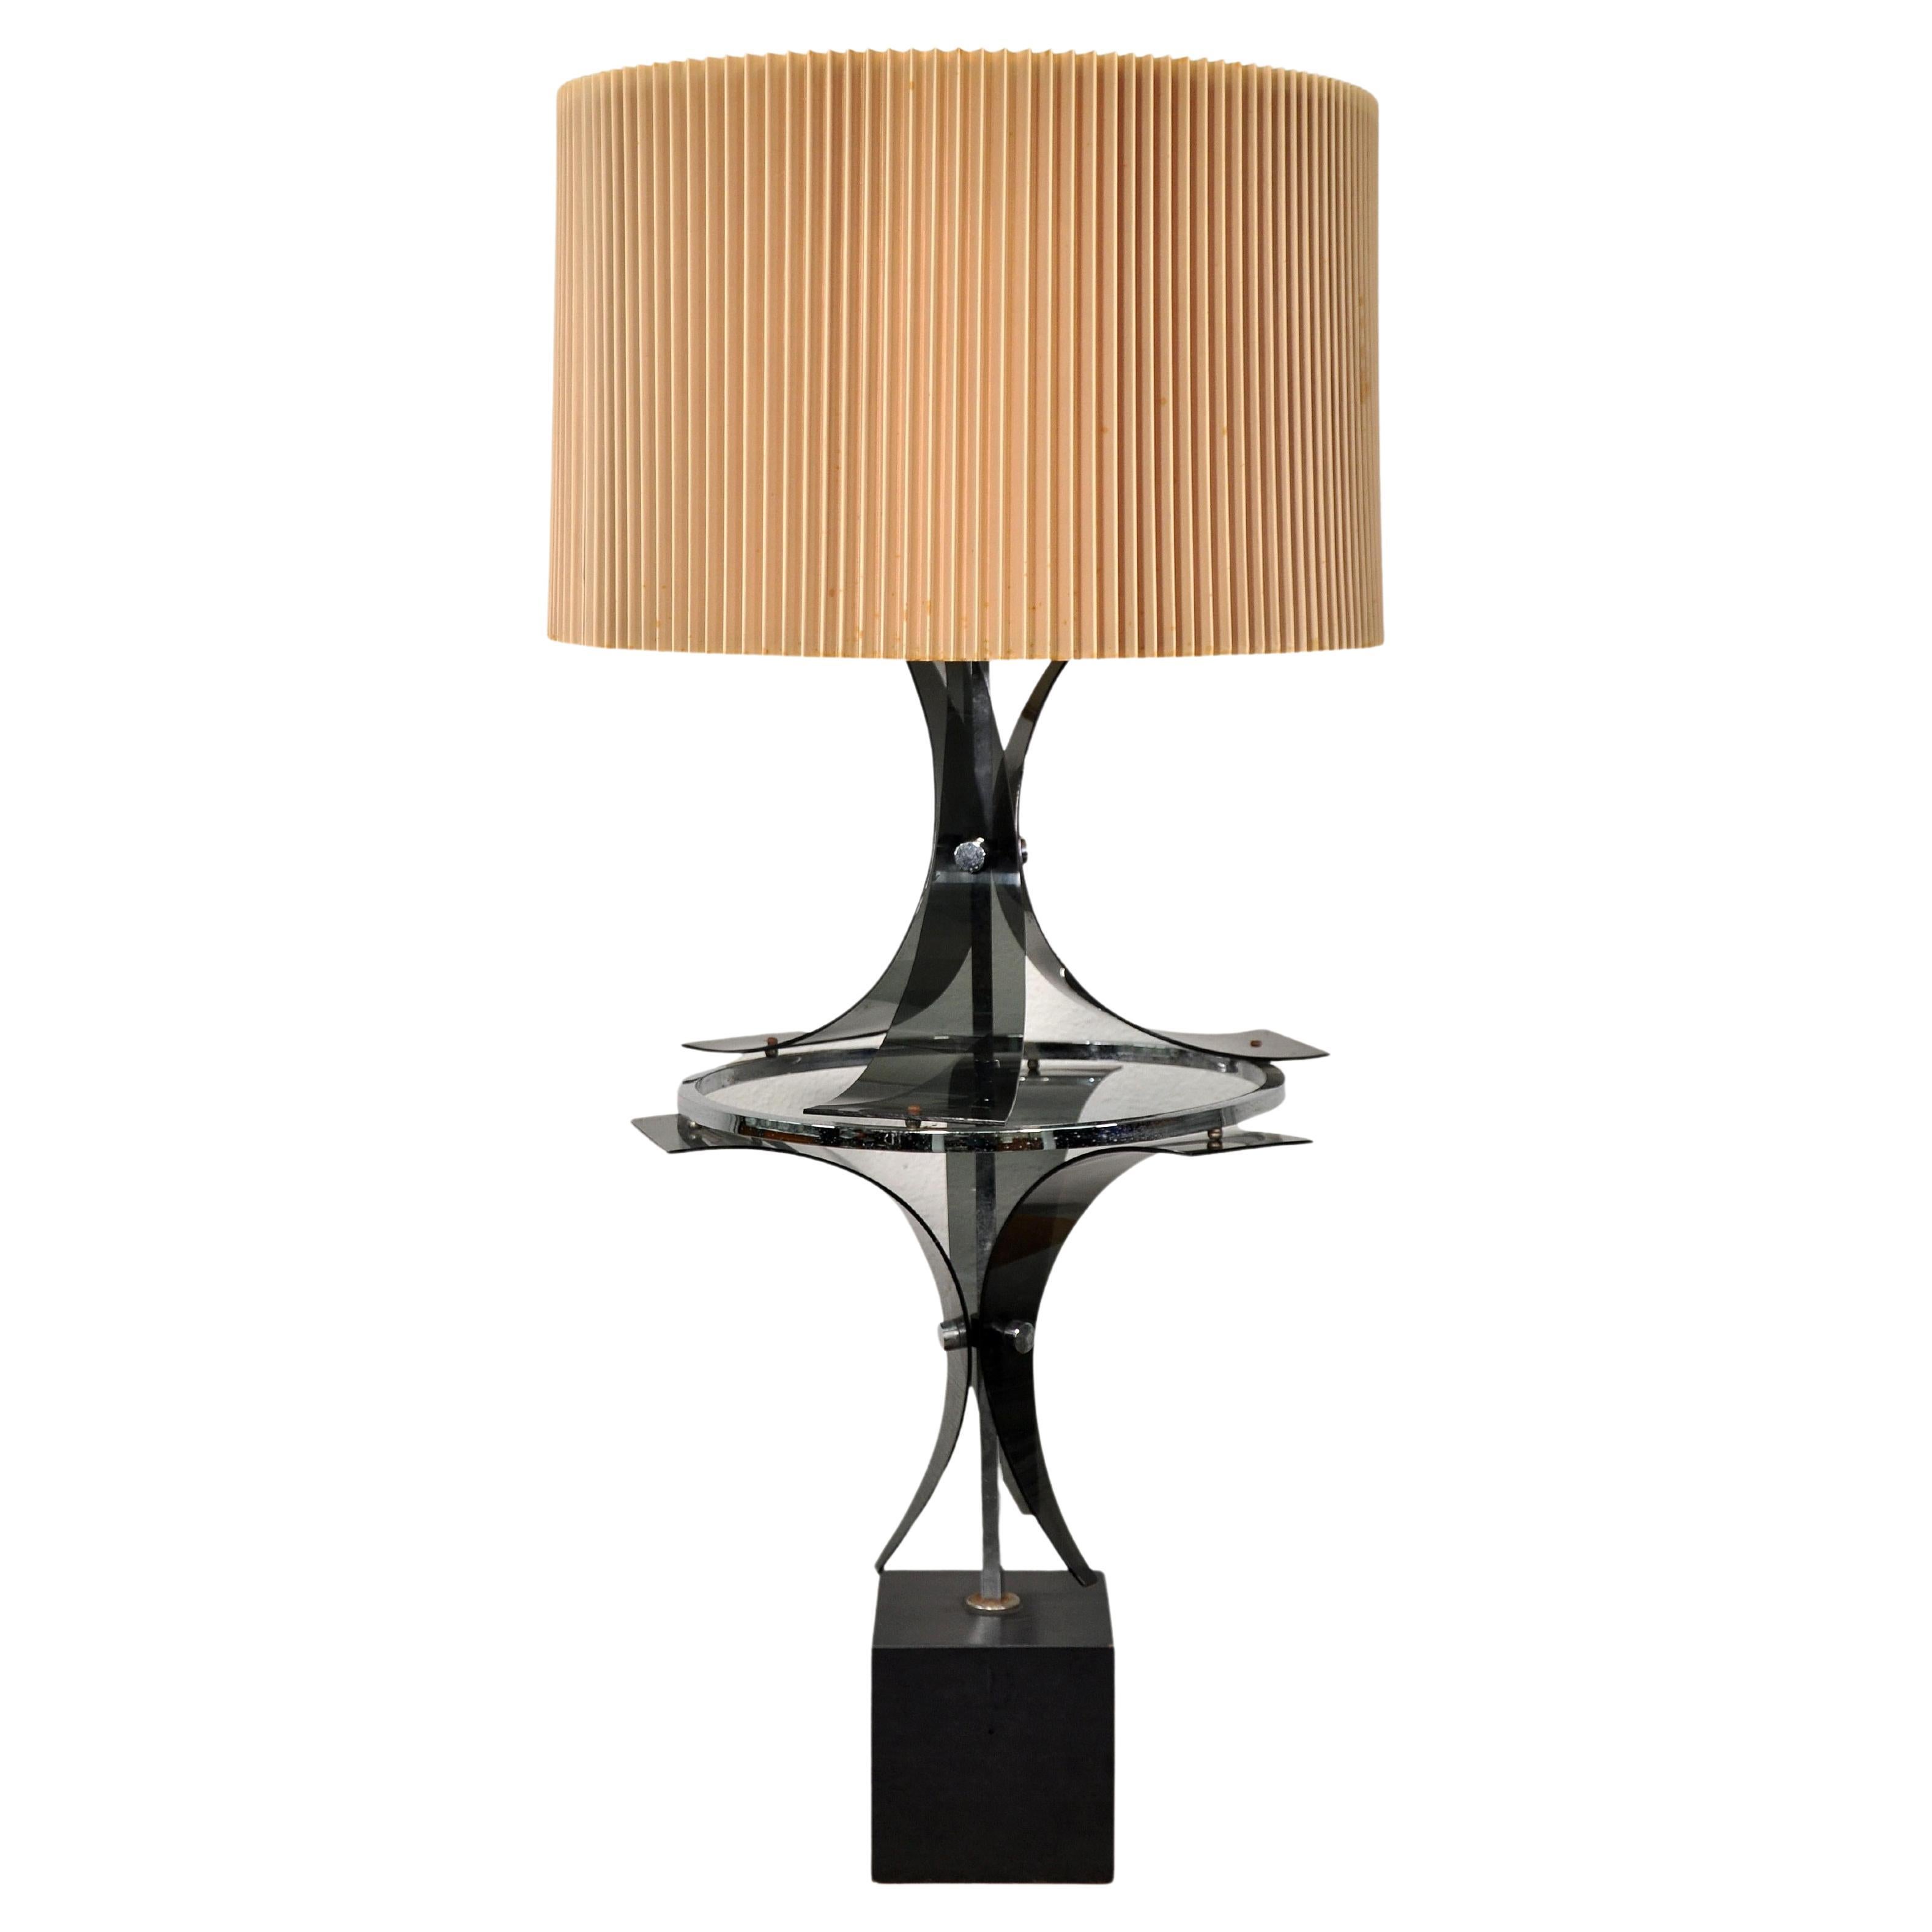 Unique Midcentury Smoked Lucite and Chrome Tall Table Lamp